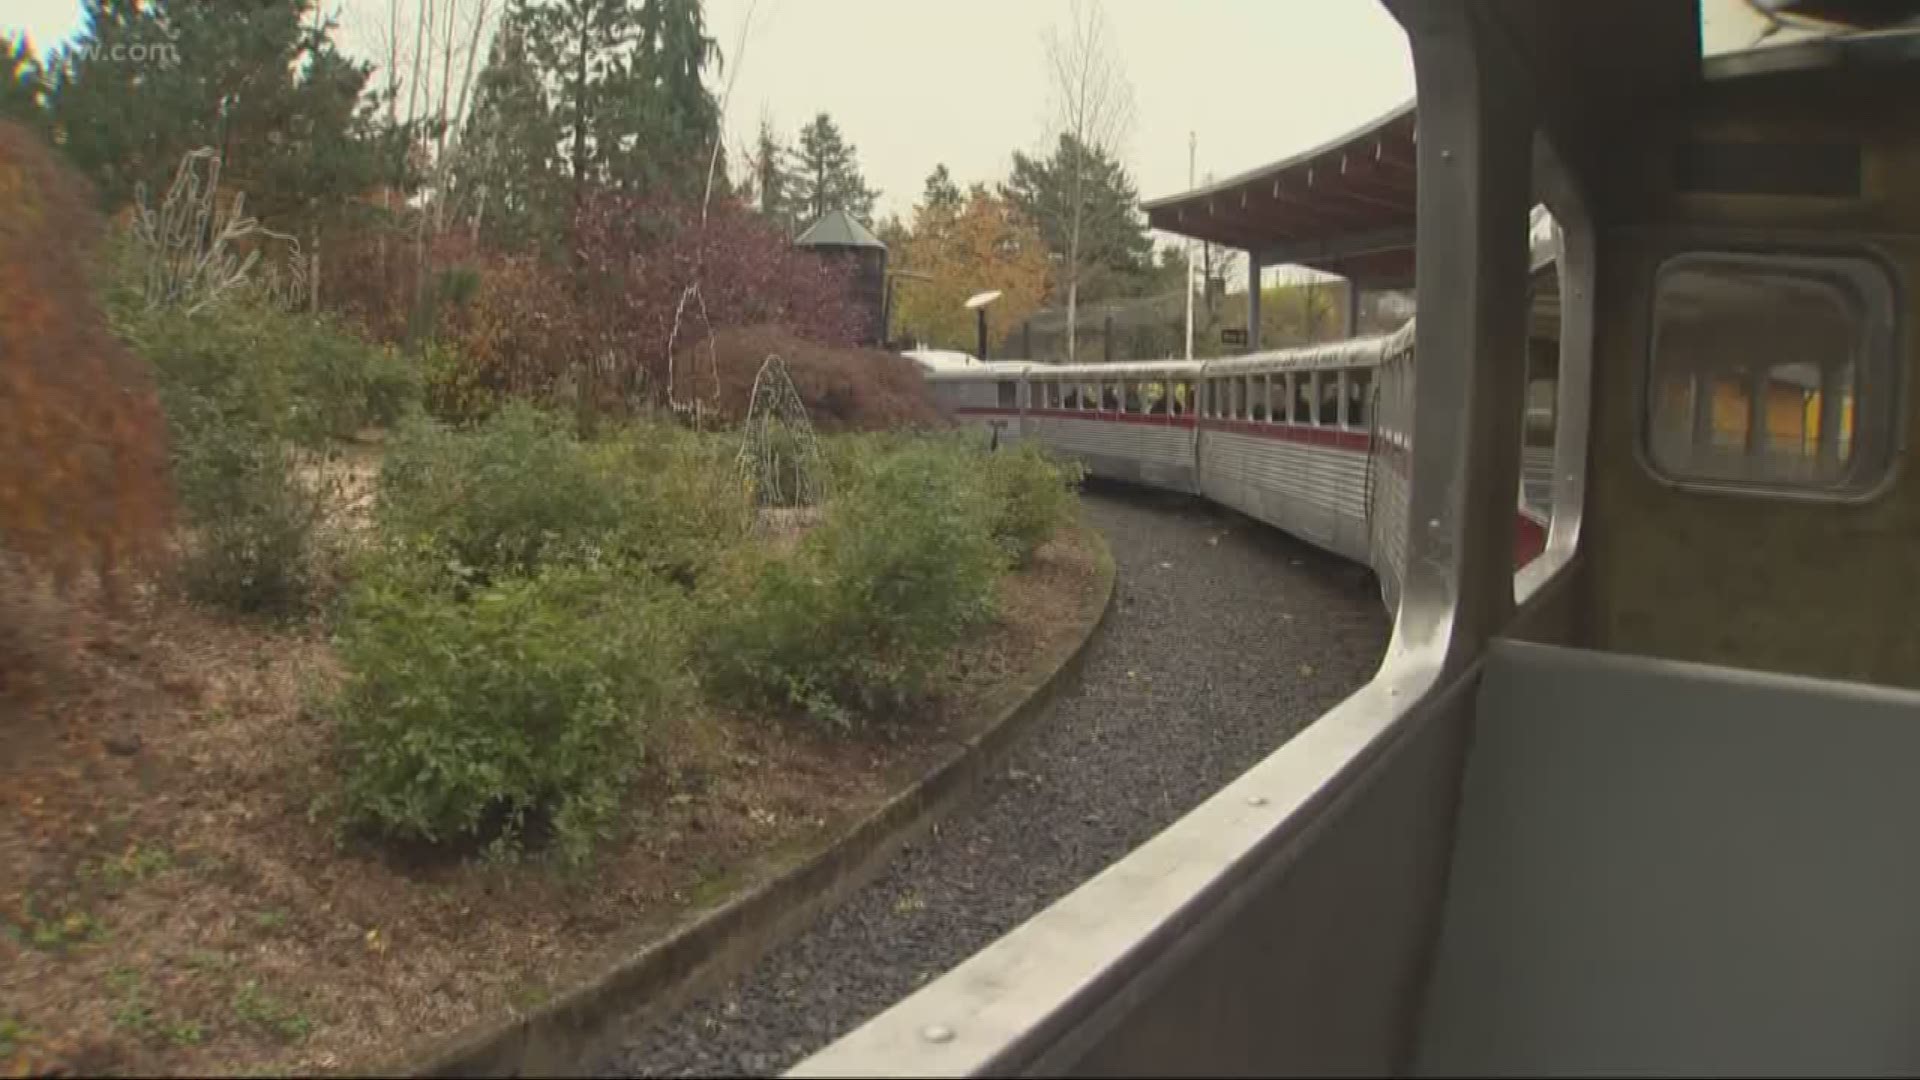 A historic landmark? The Oregon Zoo train could be given the designation.